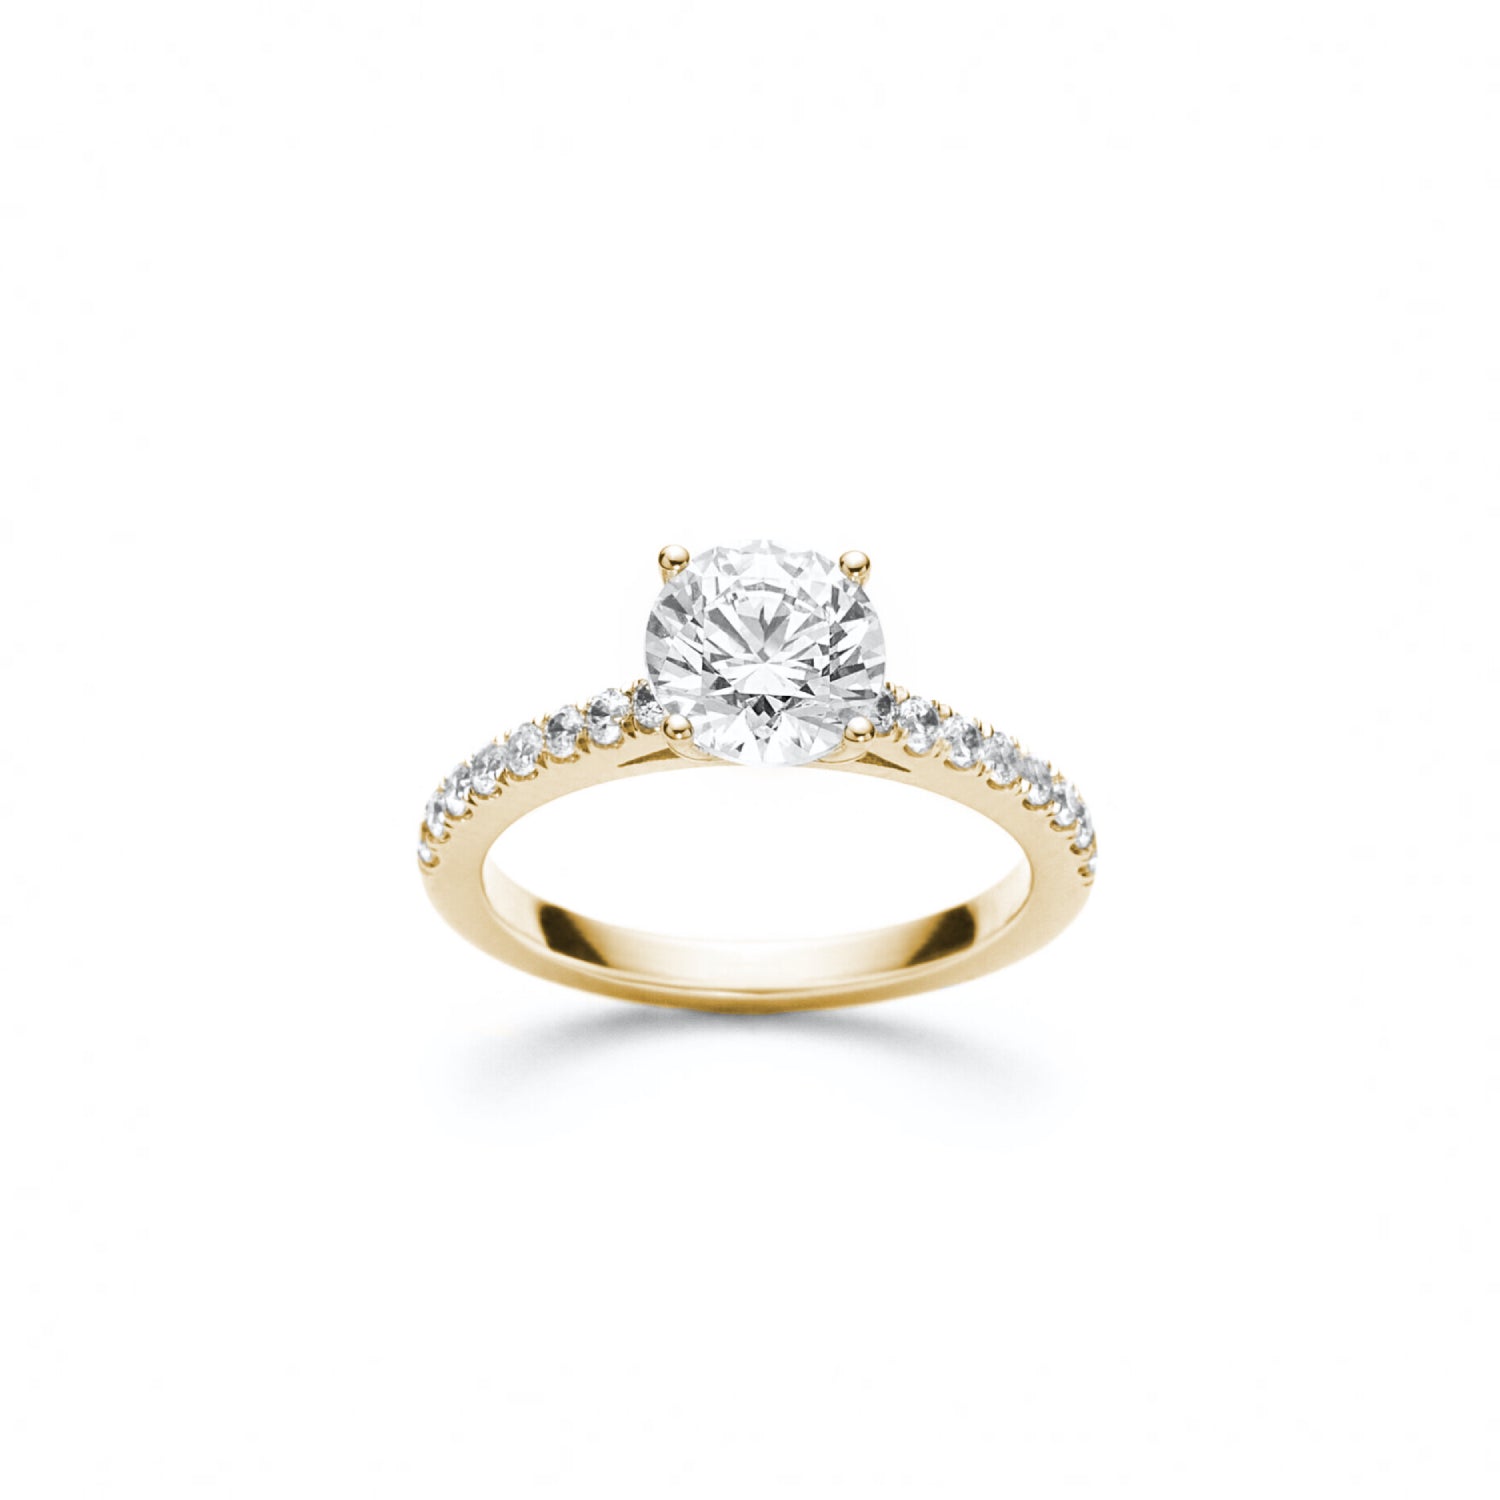 Round Brilliant Cut Diamond Solitaire Engagement Ring in Yellow Gold